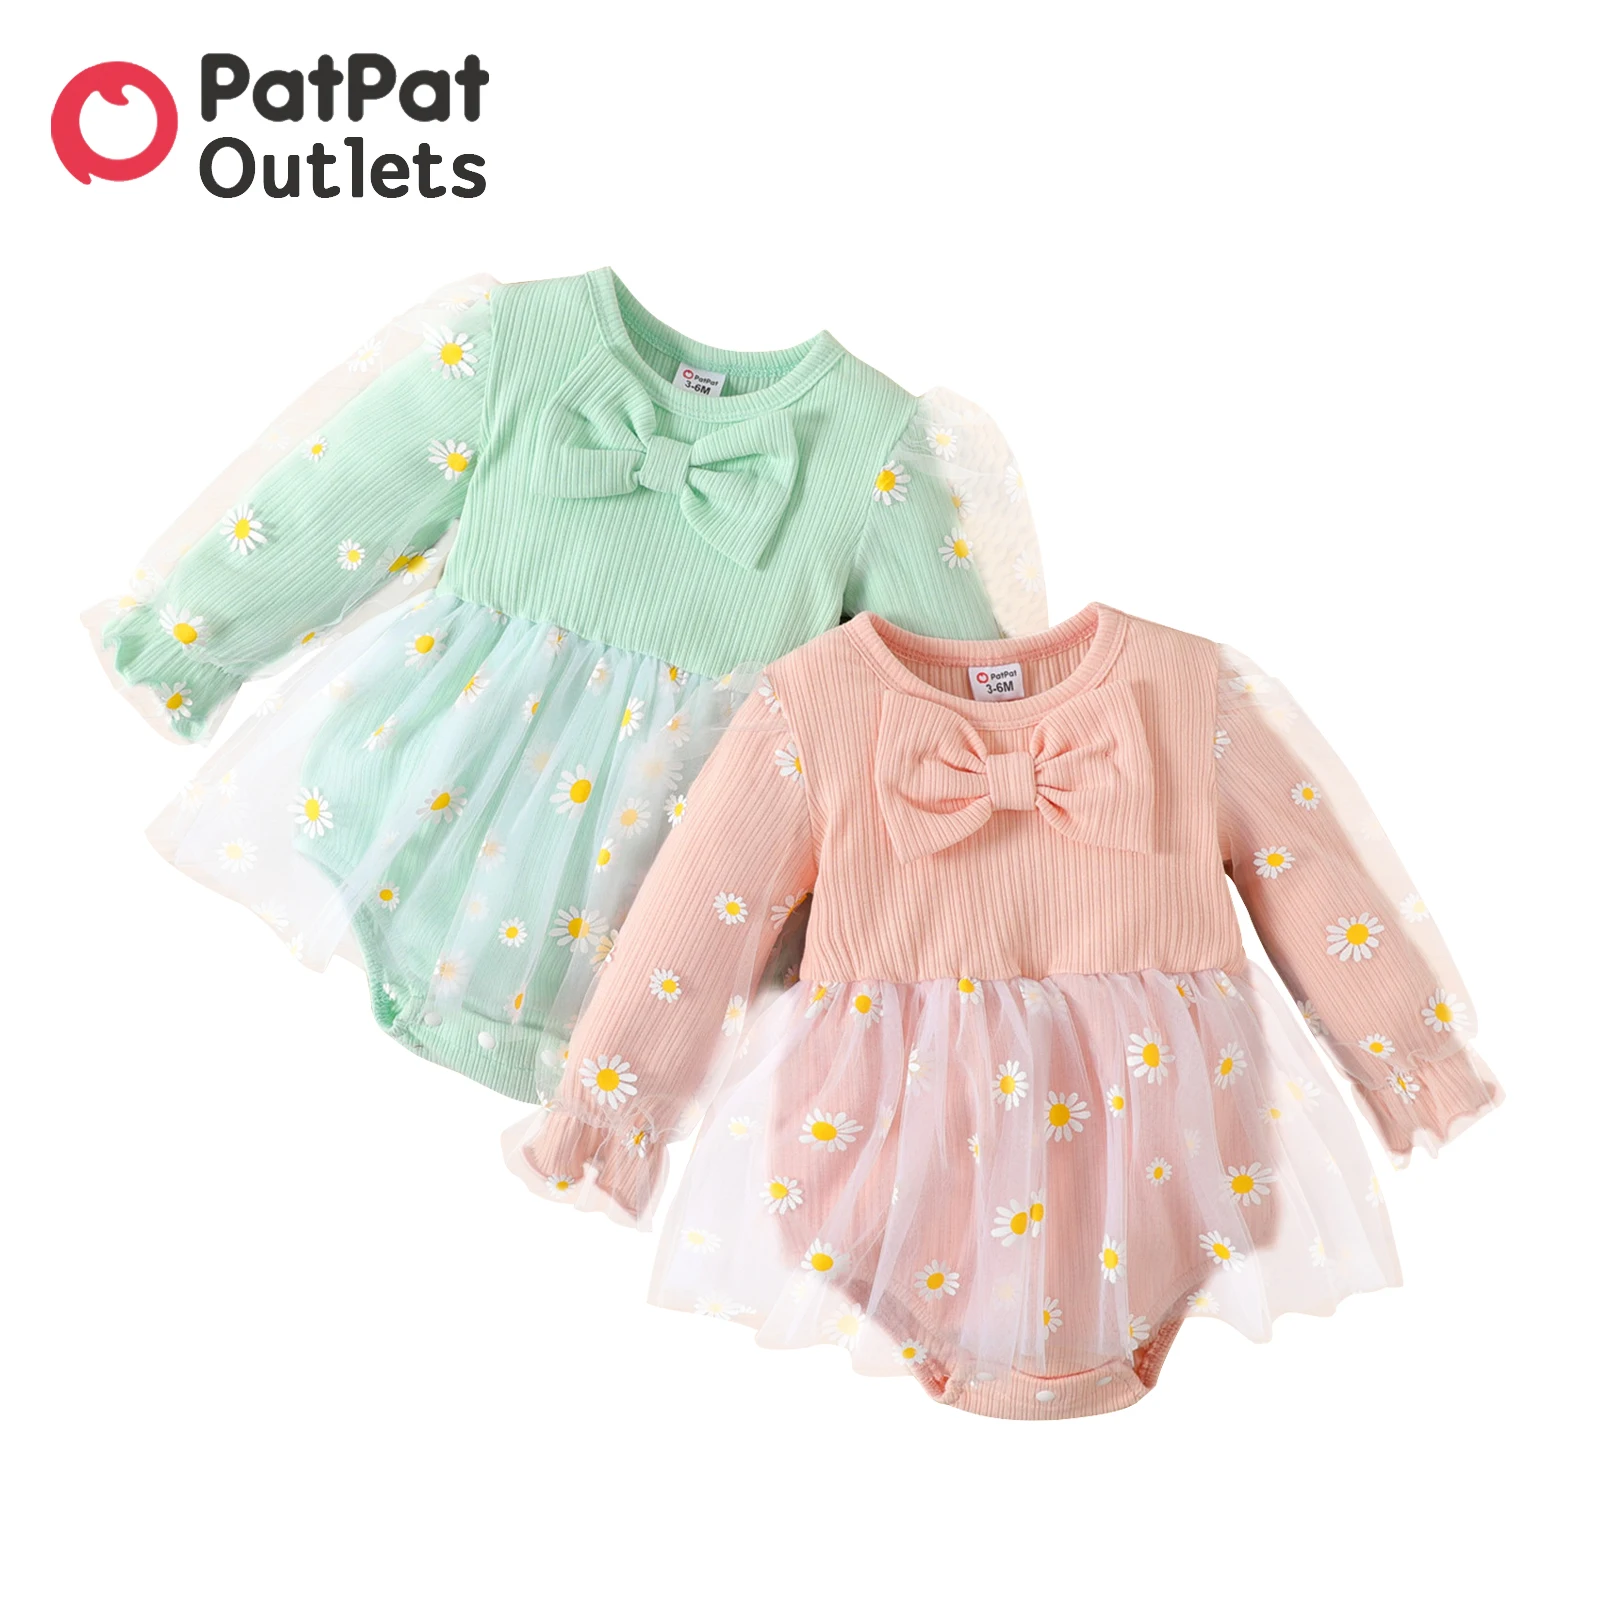 

PatPat newborn Baby Girl Clothes New Born Baby Items Overalls Jumpsuits Mesh Spliced Rib Knit Bow Long-sleeve Romper Bodysuit